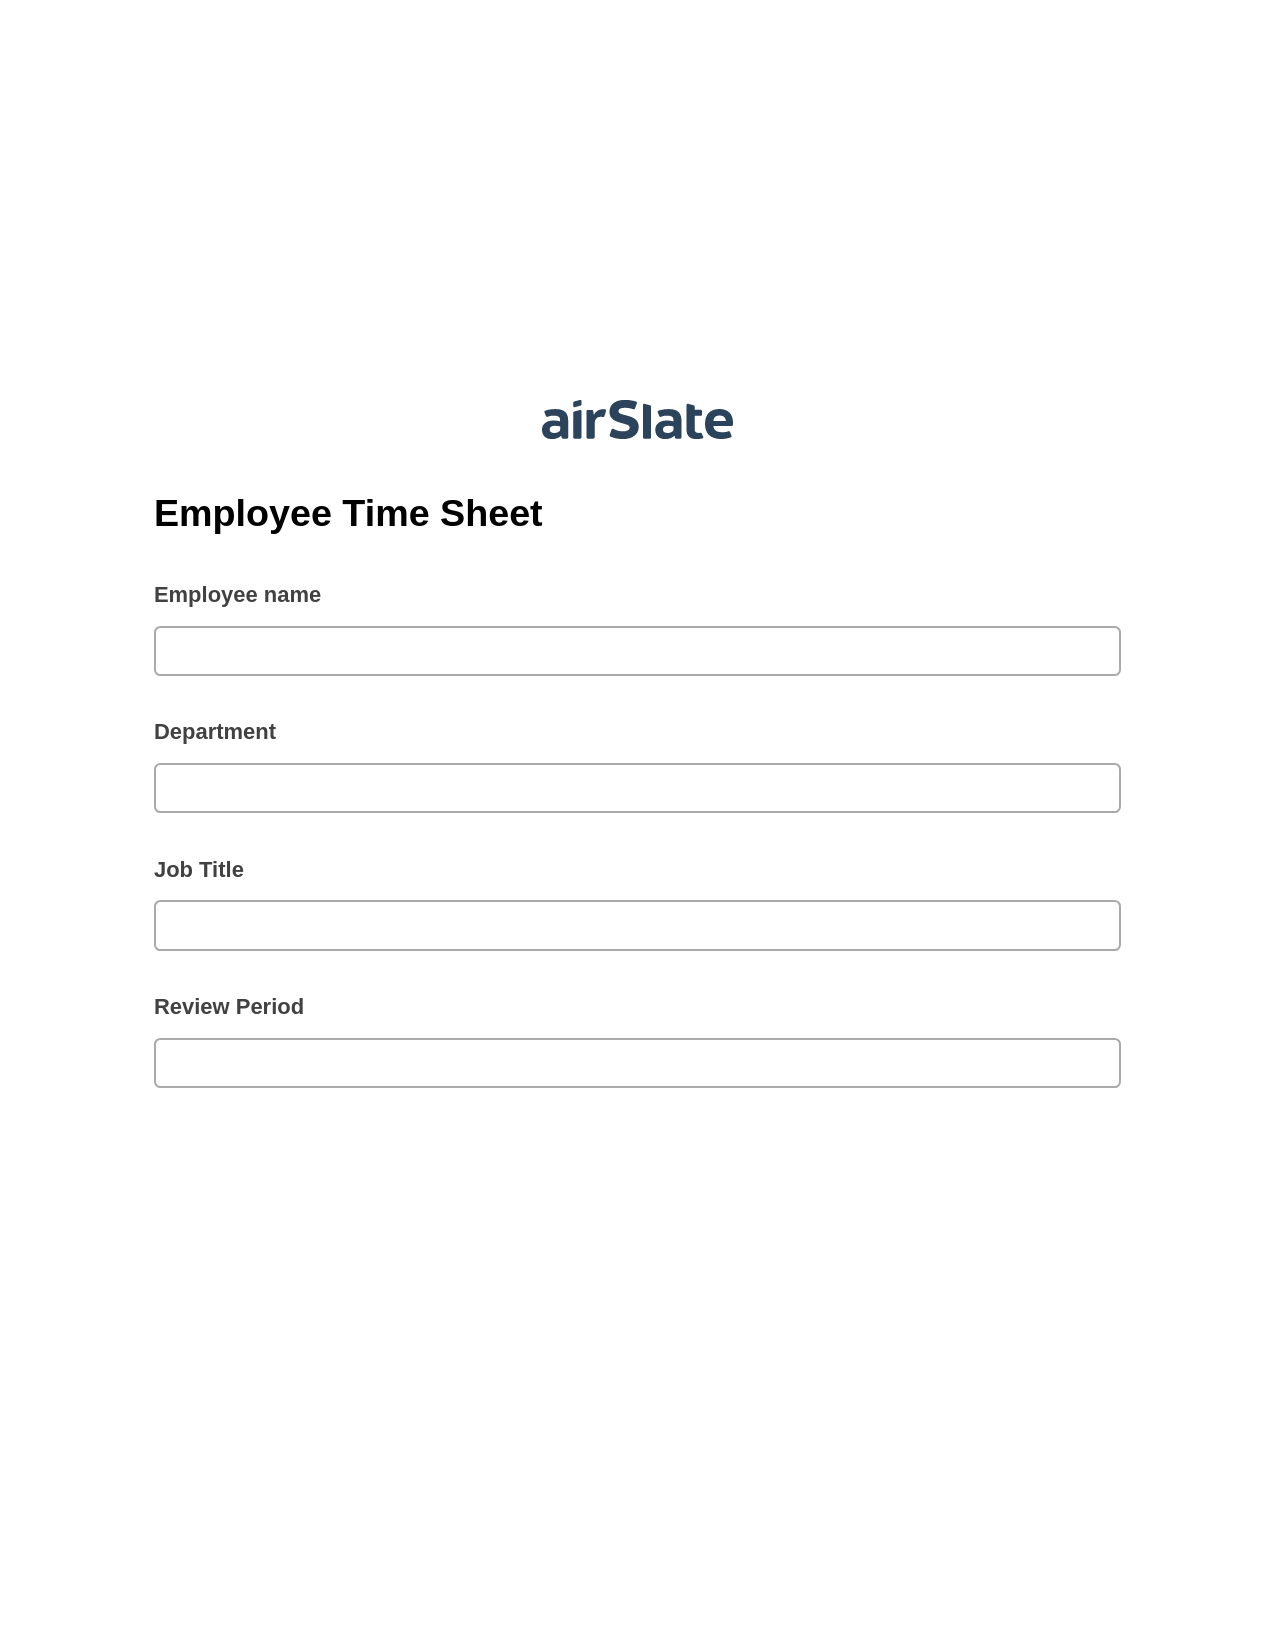 Employee Time Sheet Pre-fill Dropdowns from Airtable, Create Salesforce Records Bot, Post-finish Document Bot